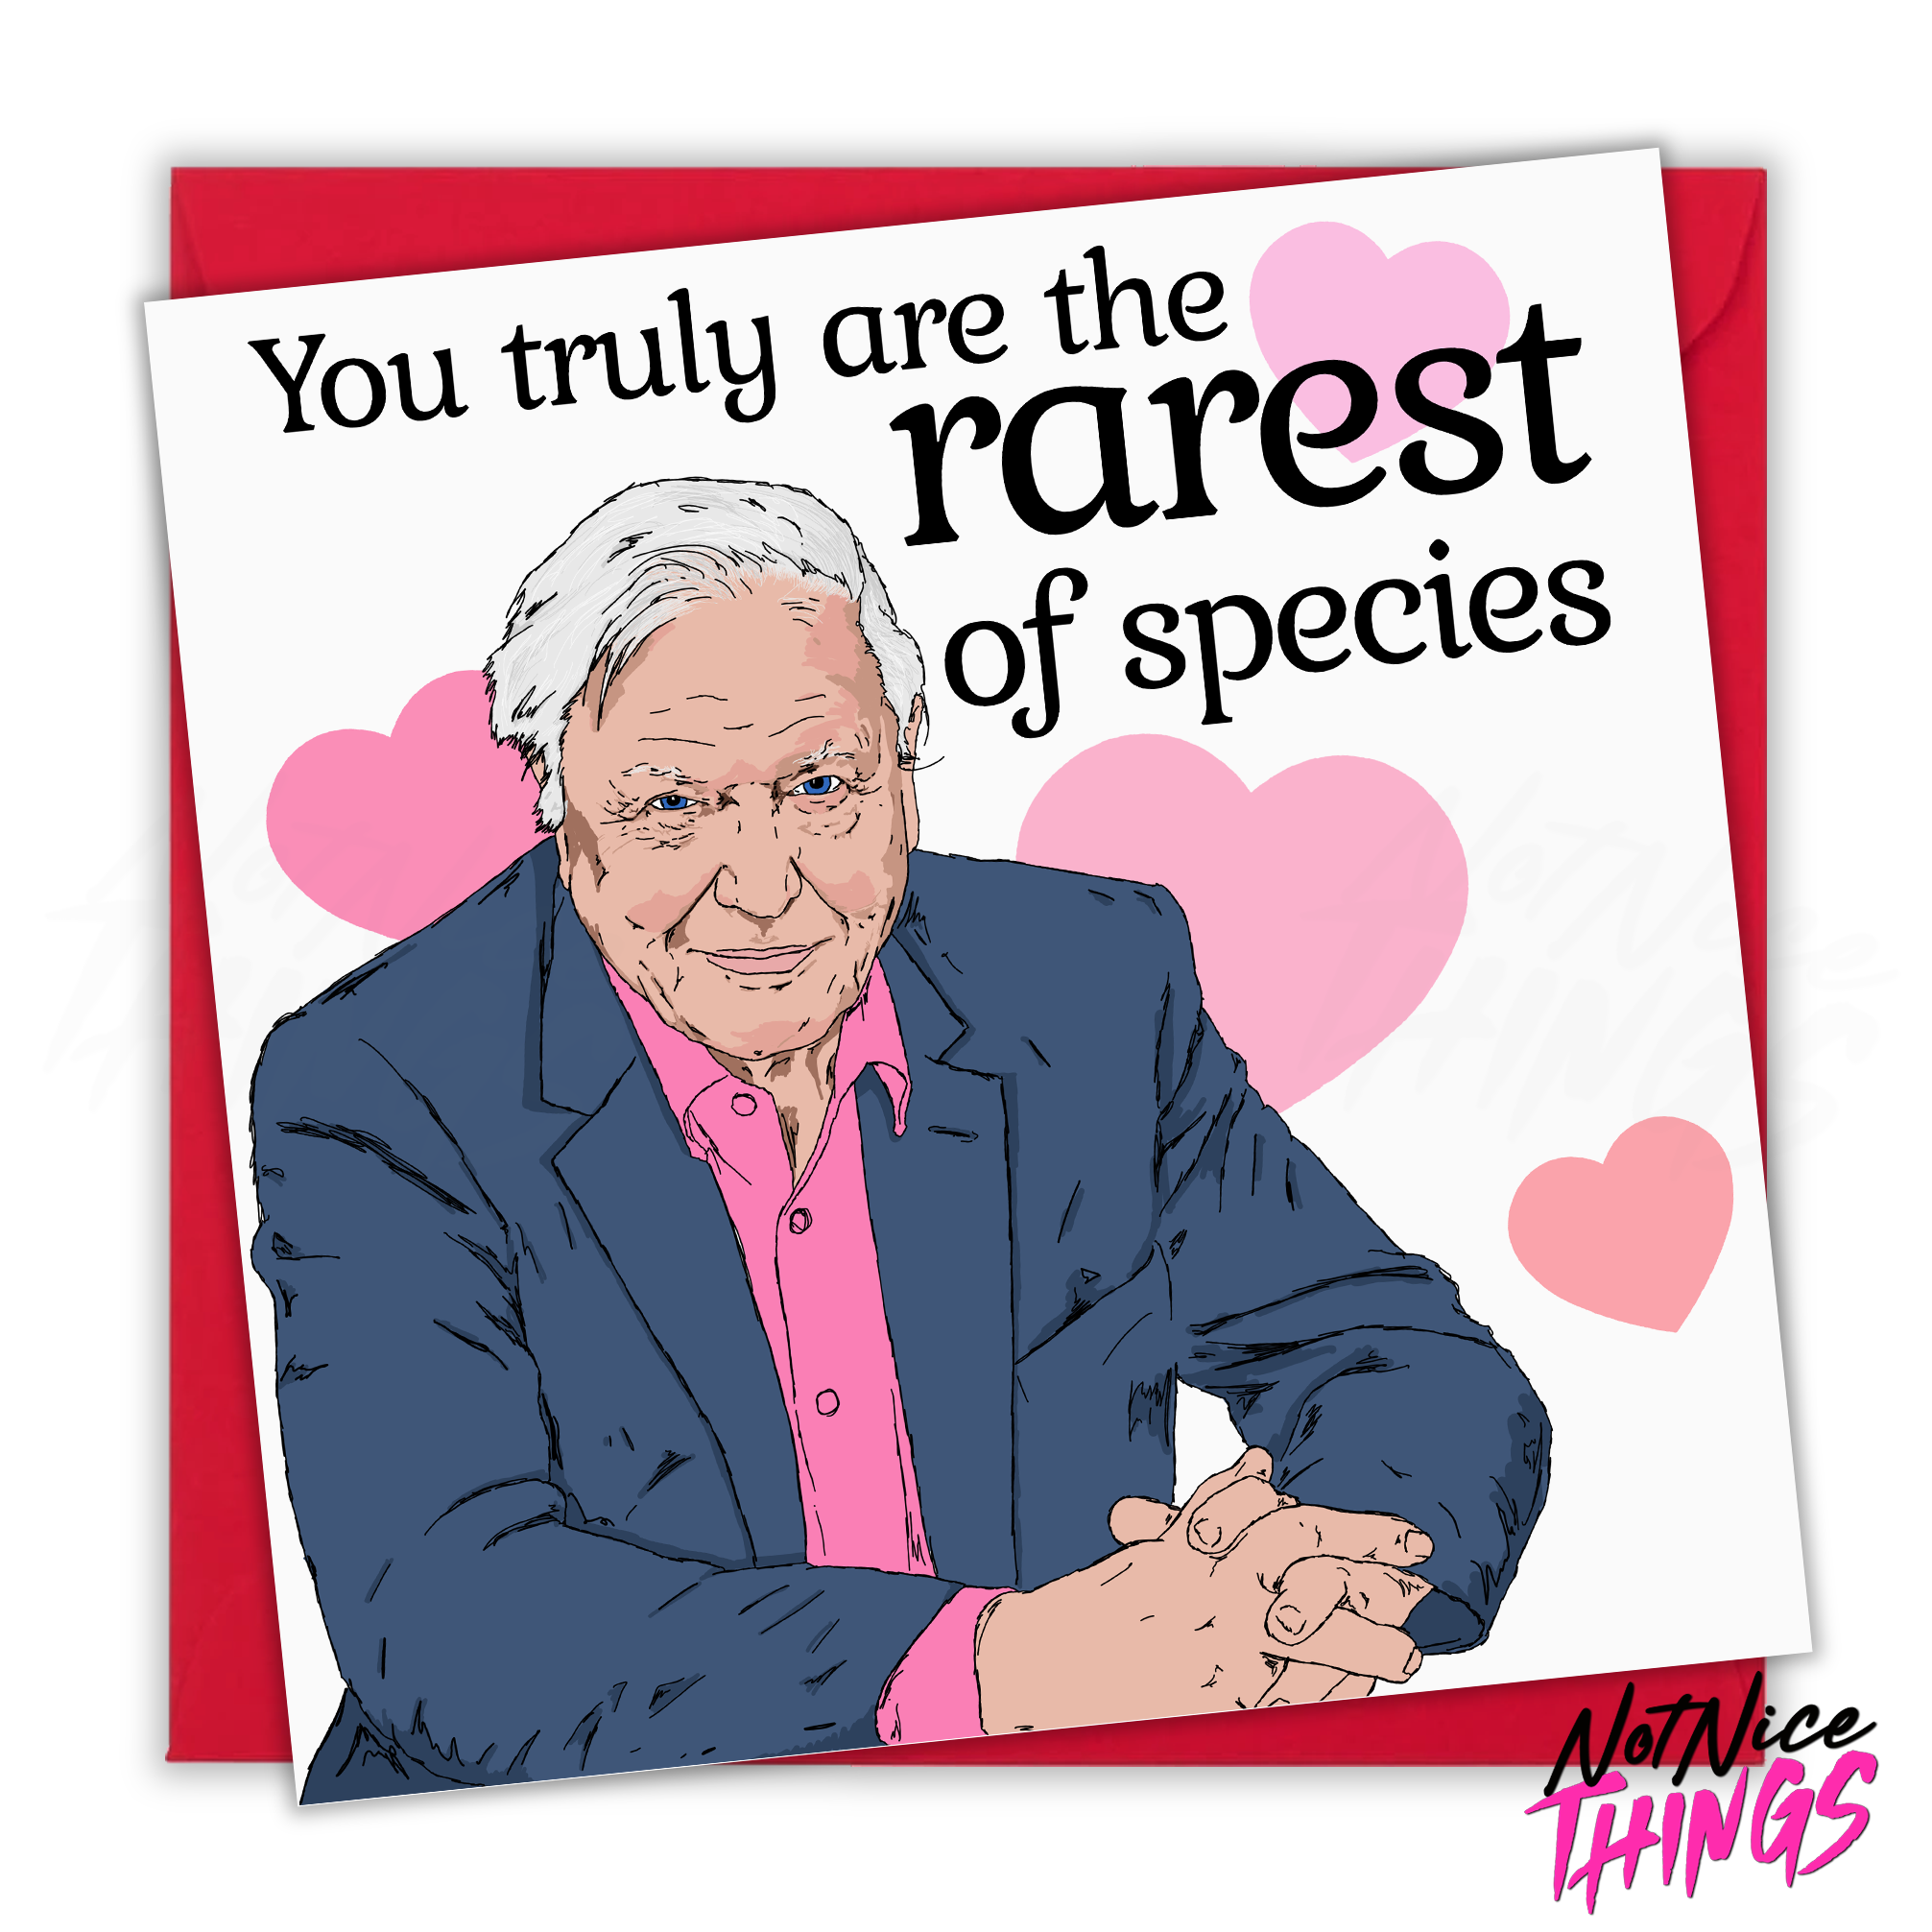 Rare Species, David Attenborough Valentines Card, Funny Valentines Card for Girlfriend, For her, Planet Earth, Vegan, Cute Valentine Gift